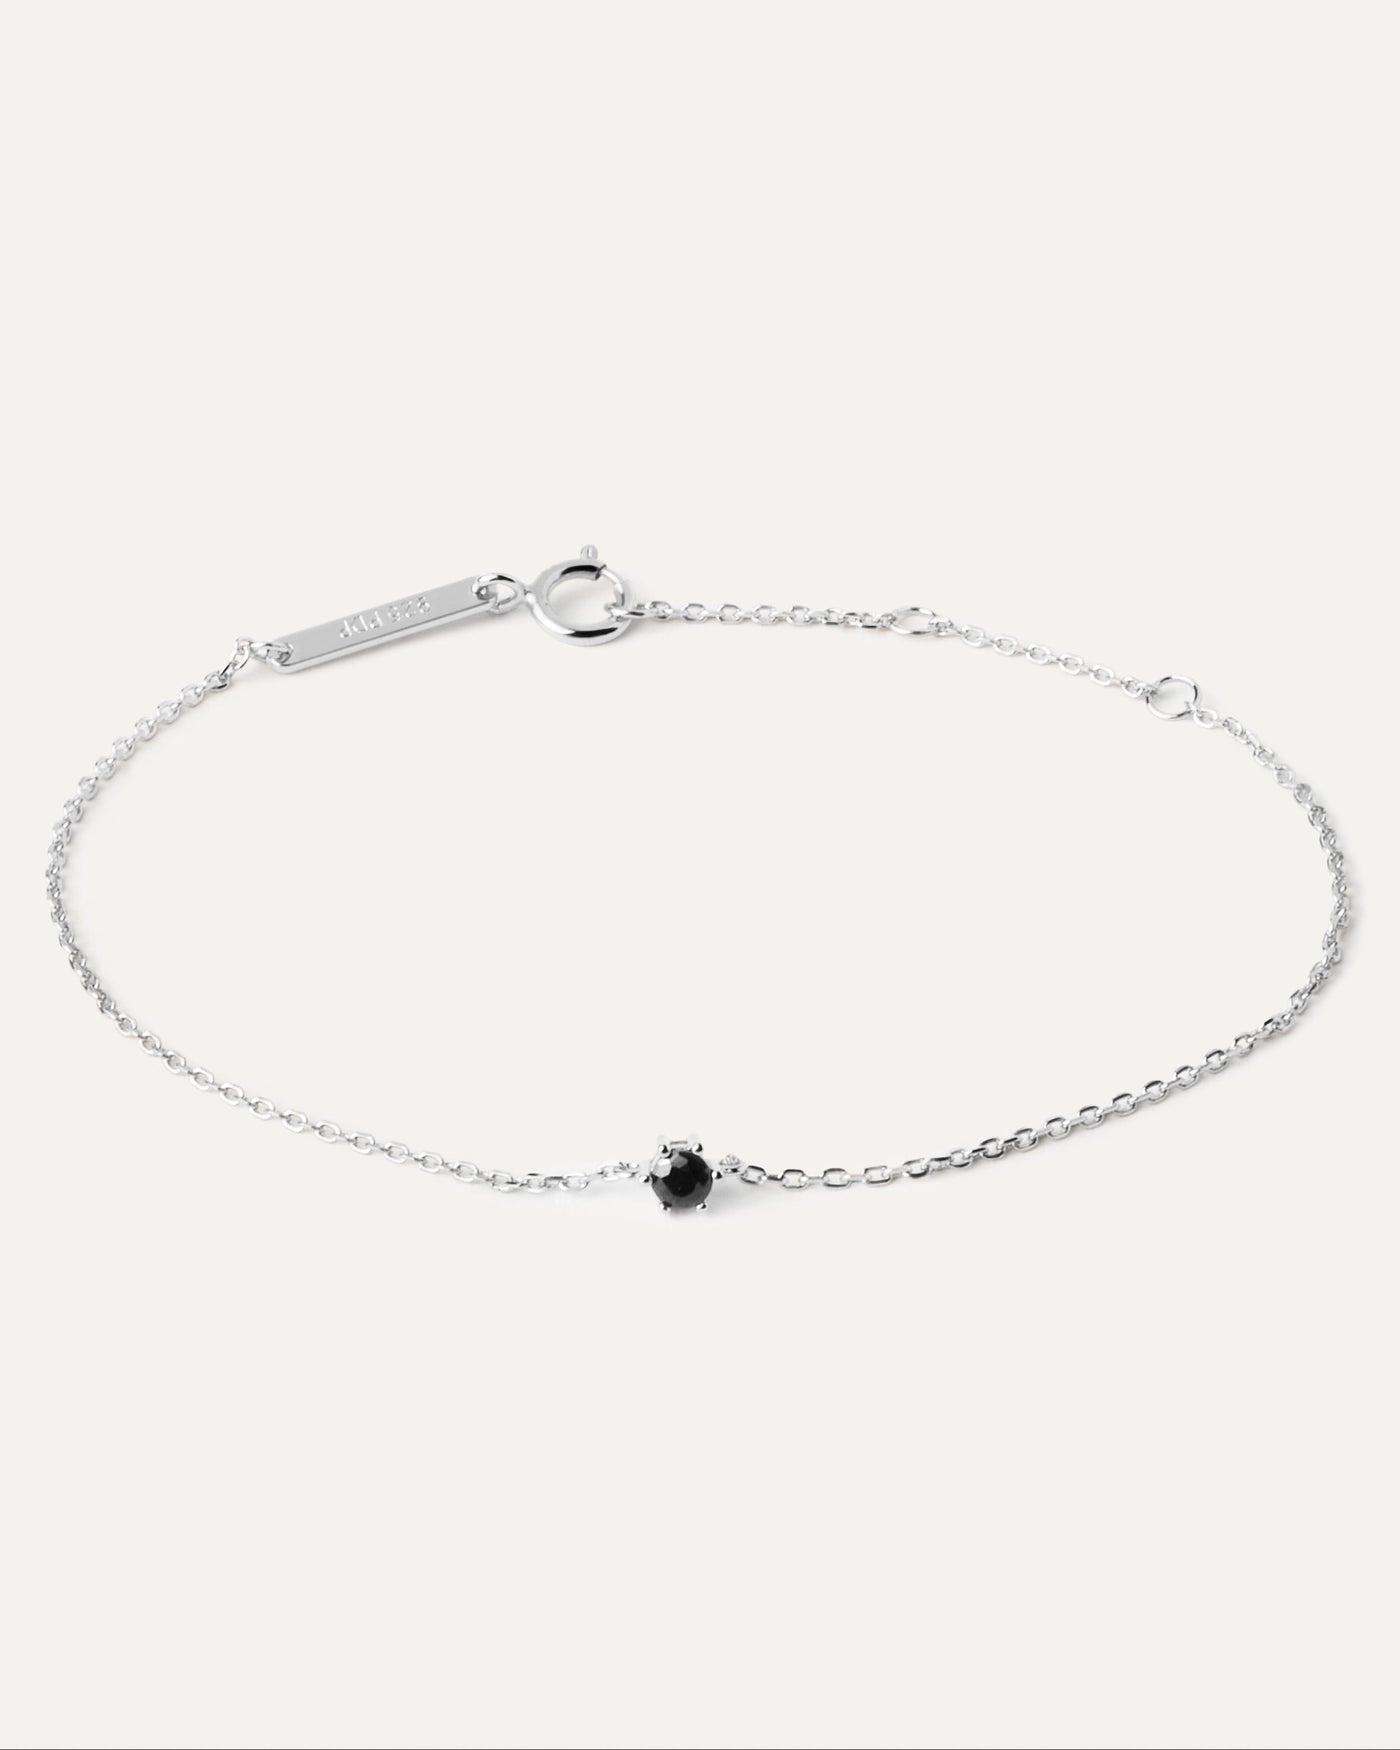 2023 Selection | Black Solitary Bracelet Silver. Thin chain bracelet in 925 sterling silver and a black zirconia. Get the latest arrival from PDPAOLA. Place your order safely and get this Best Seller. Free Shipping.